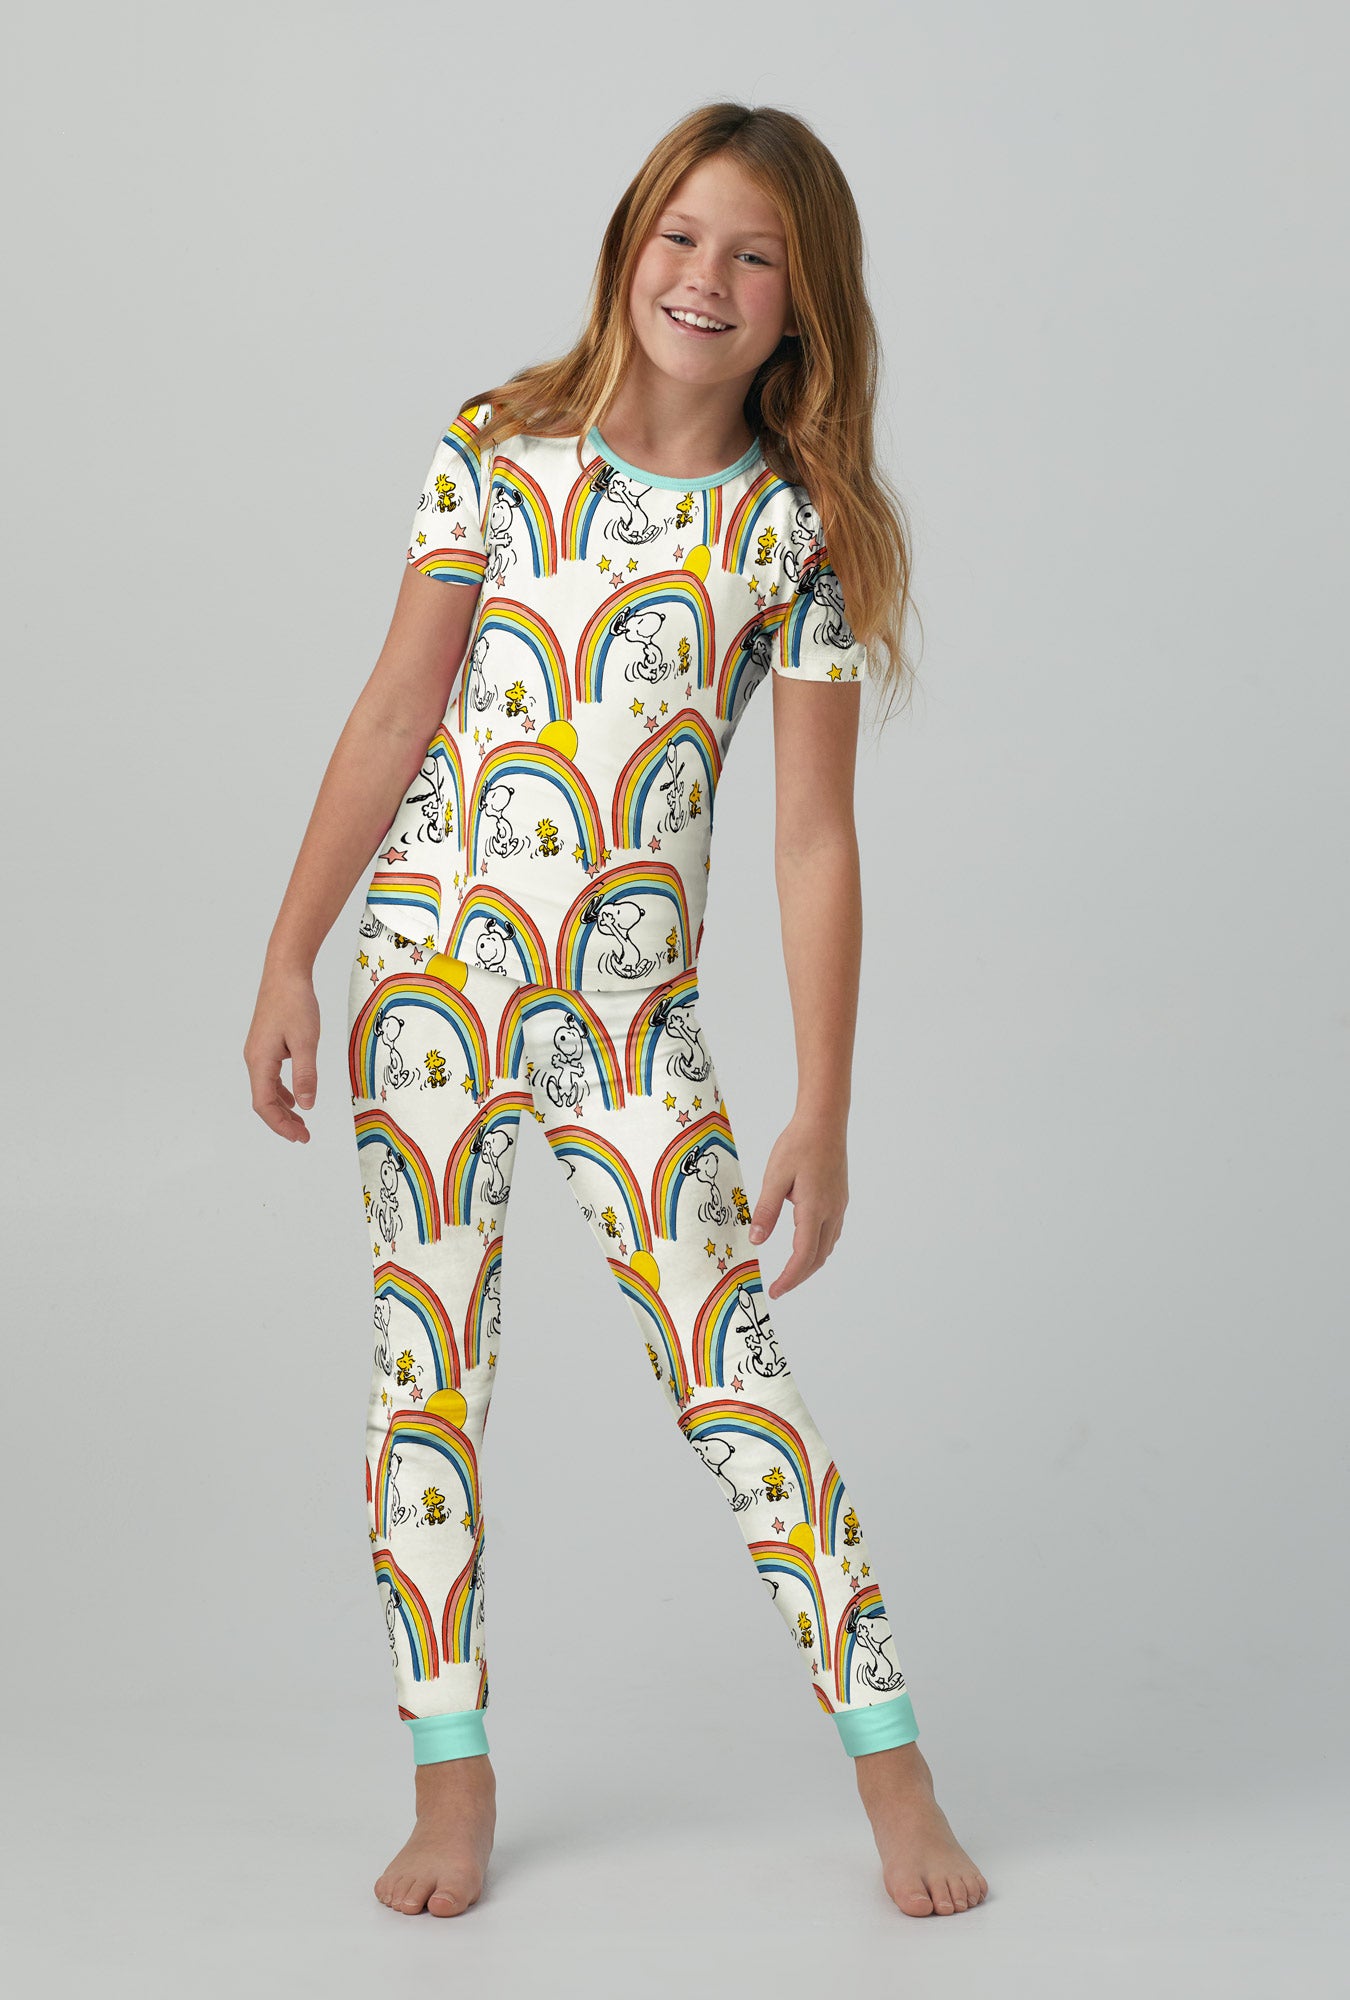 A girl wearing white Snoopy Long Sleeve Stretch Jersey Kids PJ Set with Sunshine print.